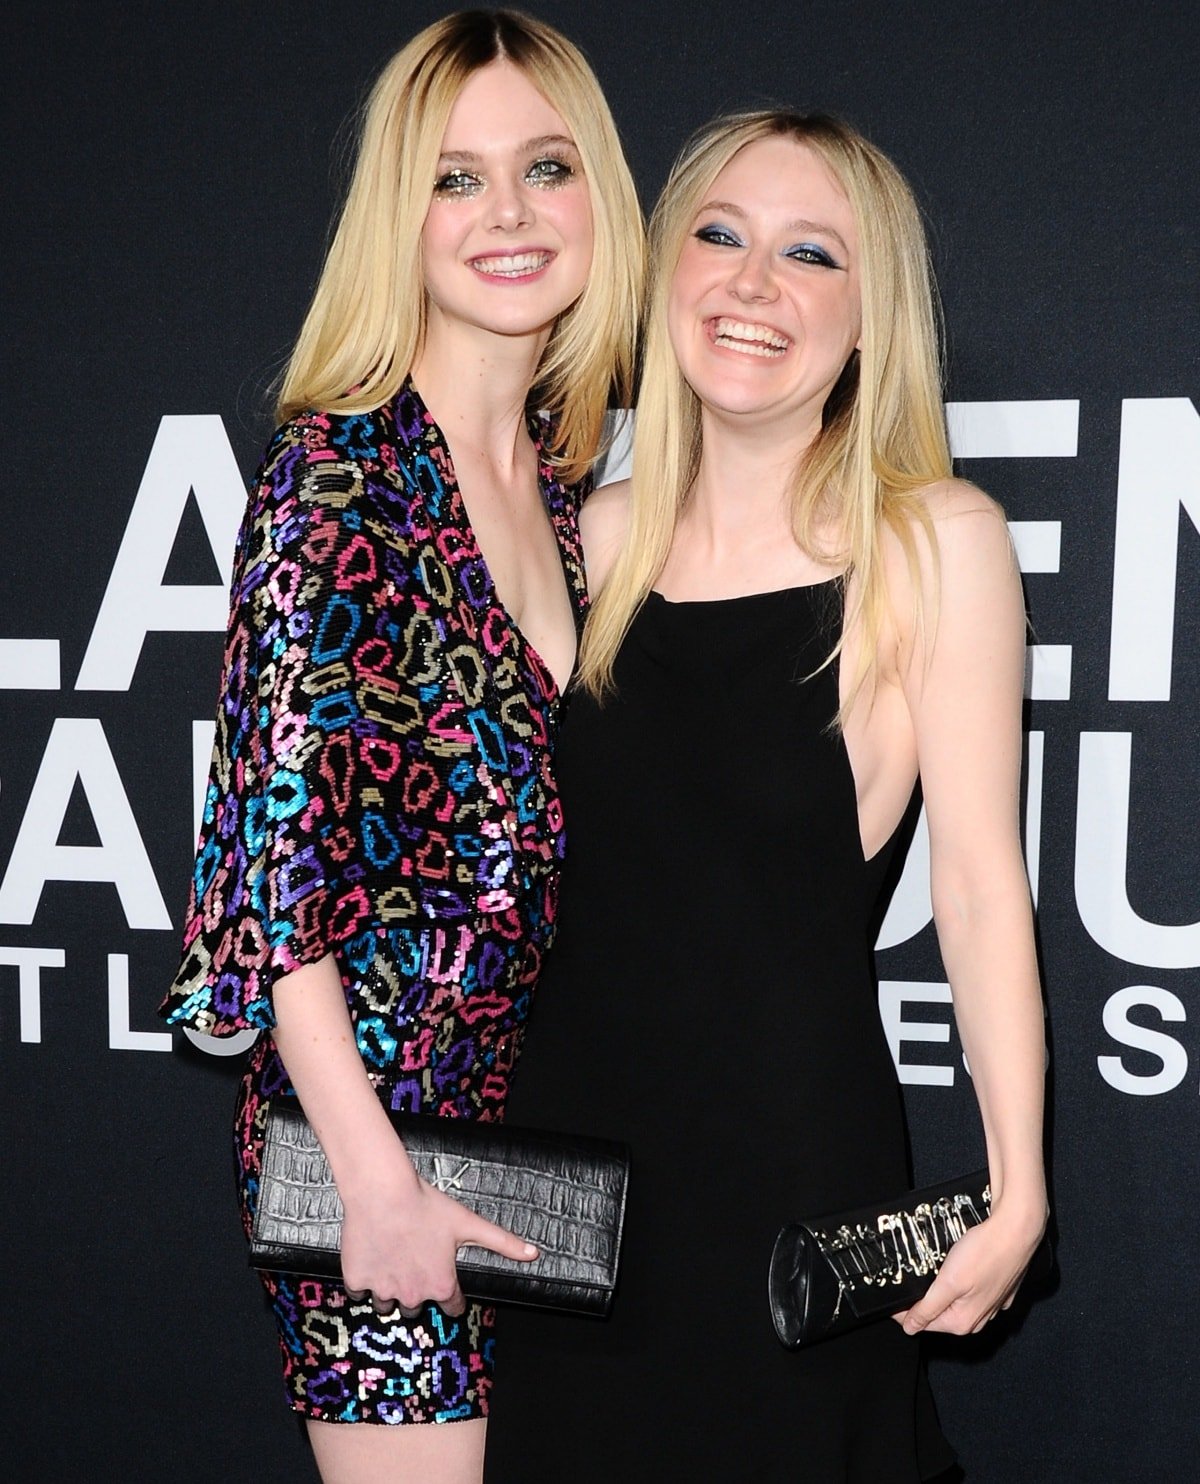 Elle and Dakota Fanning are very close, and they prioritize their family over their careers